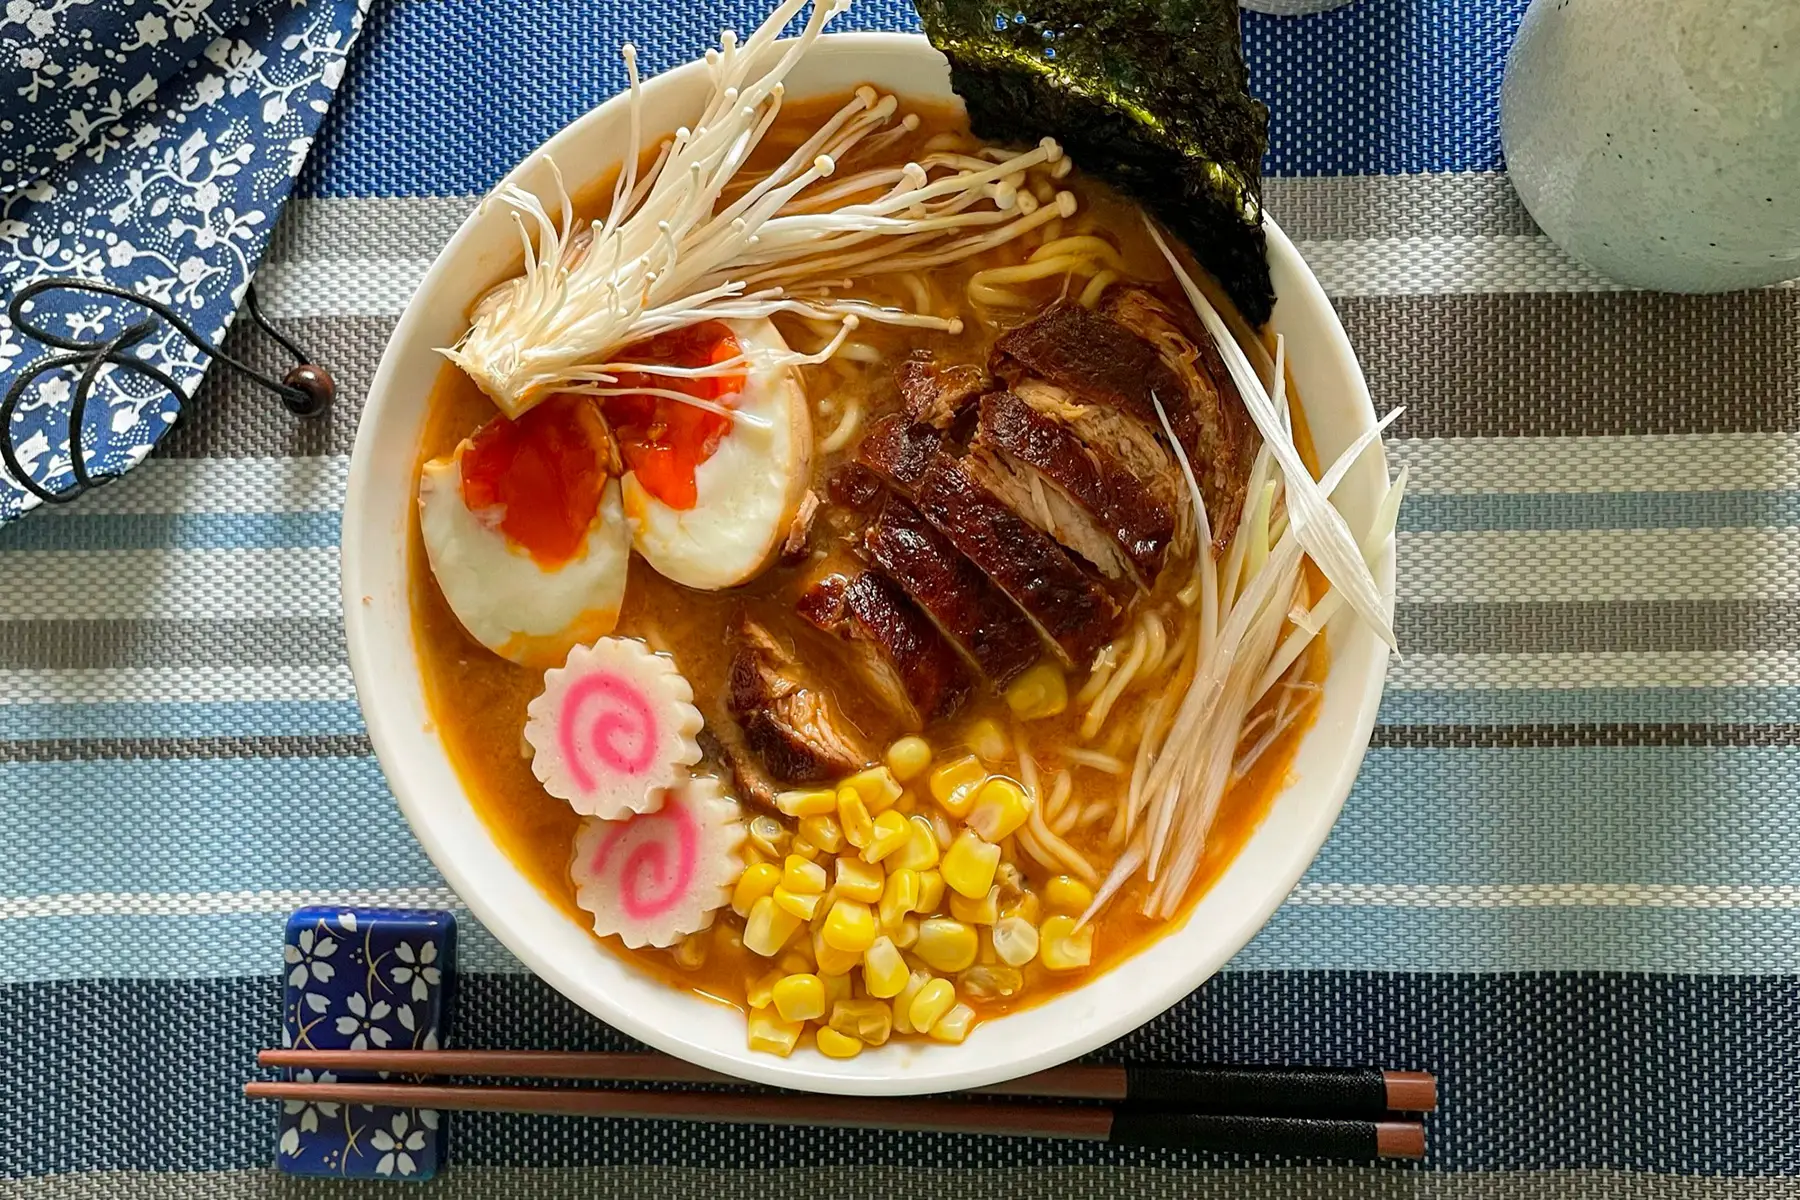 A bowl of ramen - a soup with noodles, vegetables, chicken, and egg